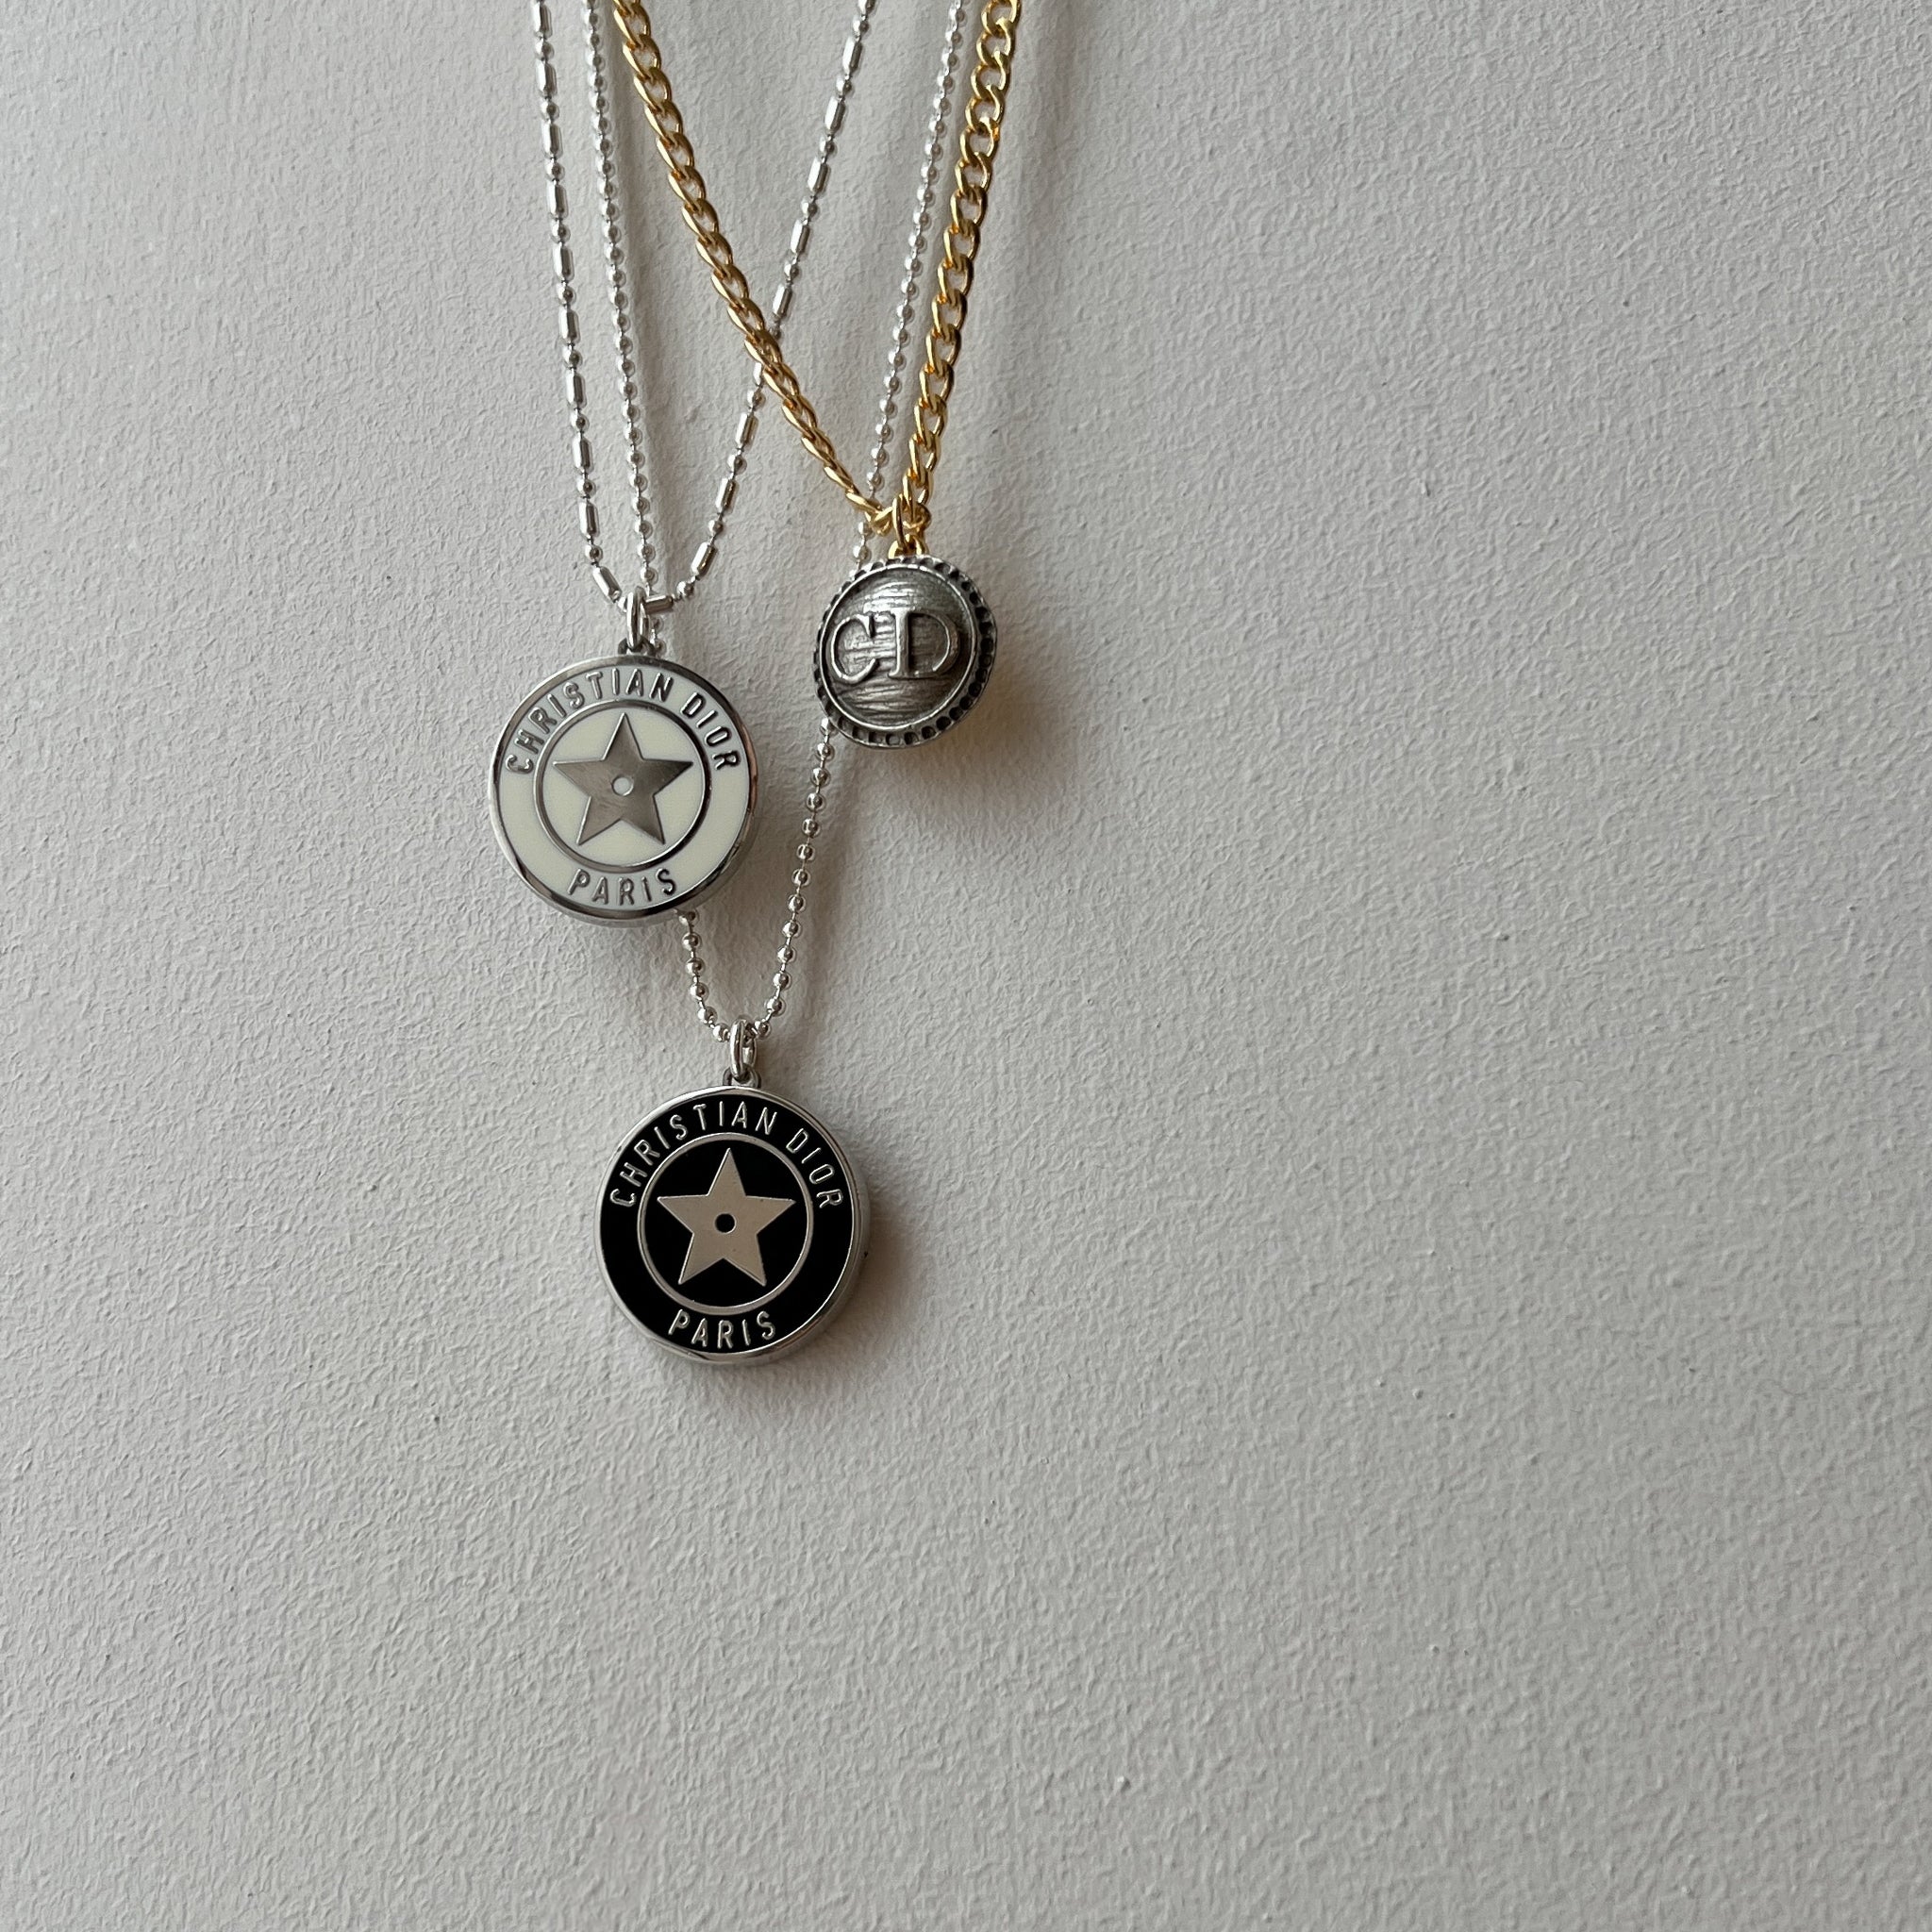 CHRISTIAN DIOR 1990s SILVER STAR PENDANT NECKLACE – RDB